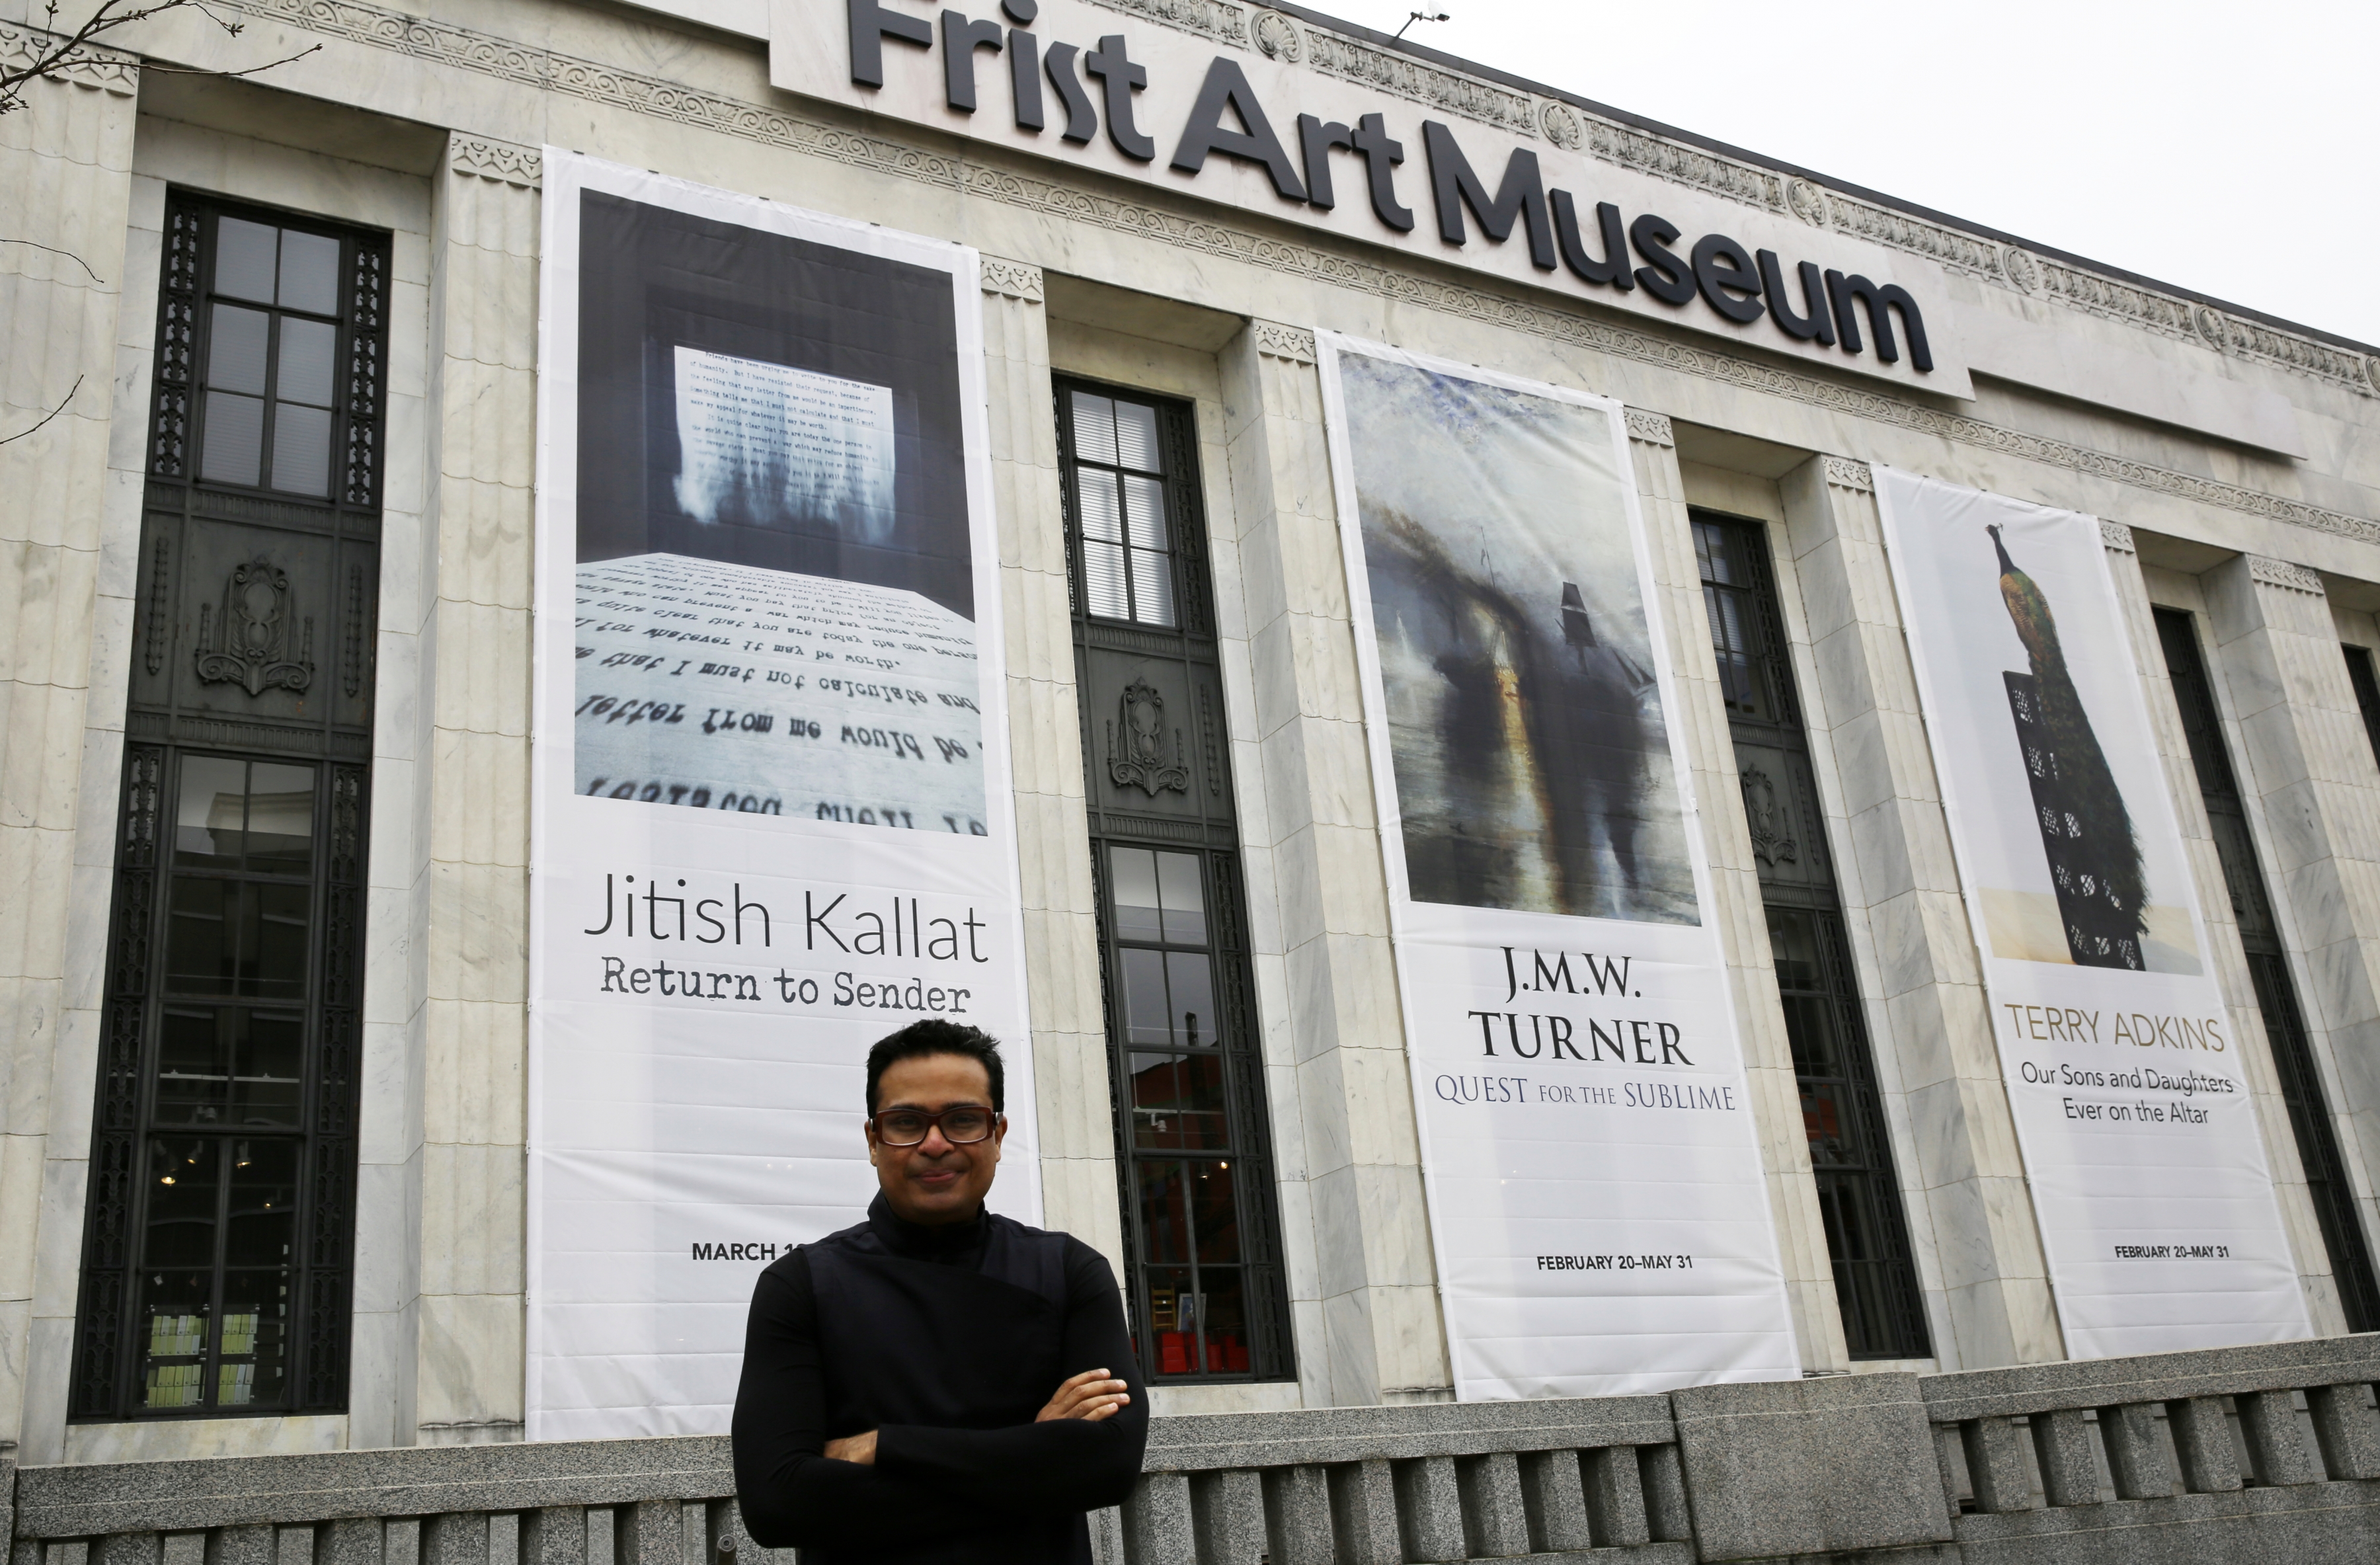 Photo of the artist standing in front of the Frist Art Museum where a banner with his name hangs on the facade